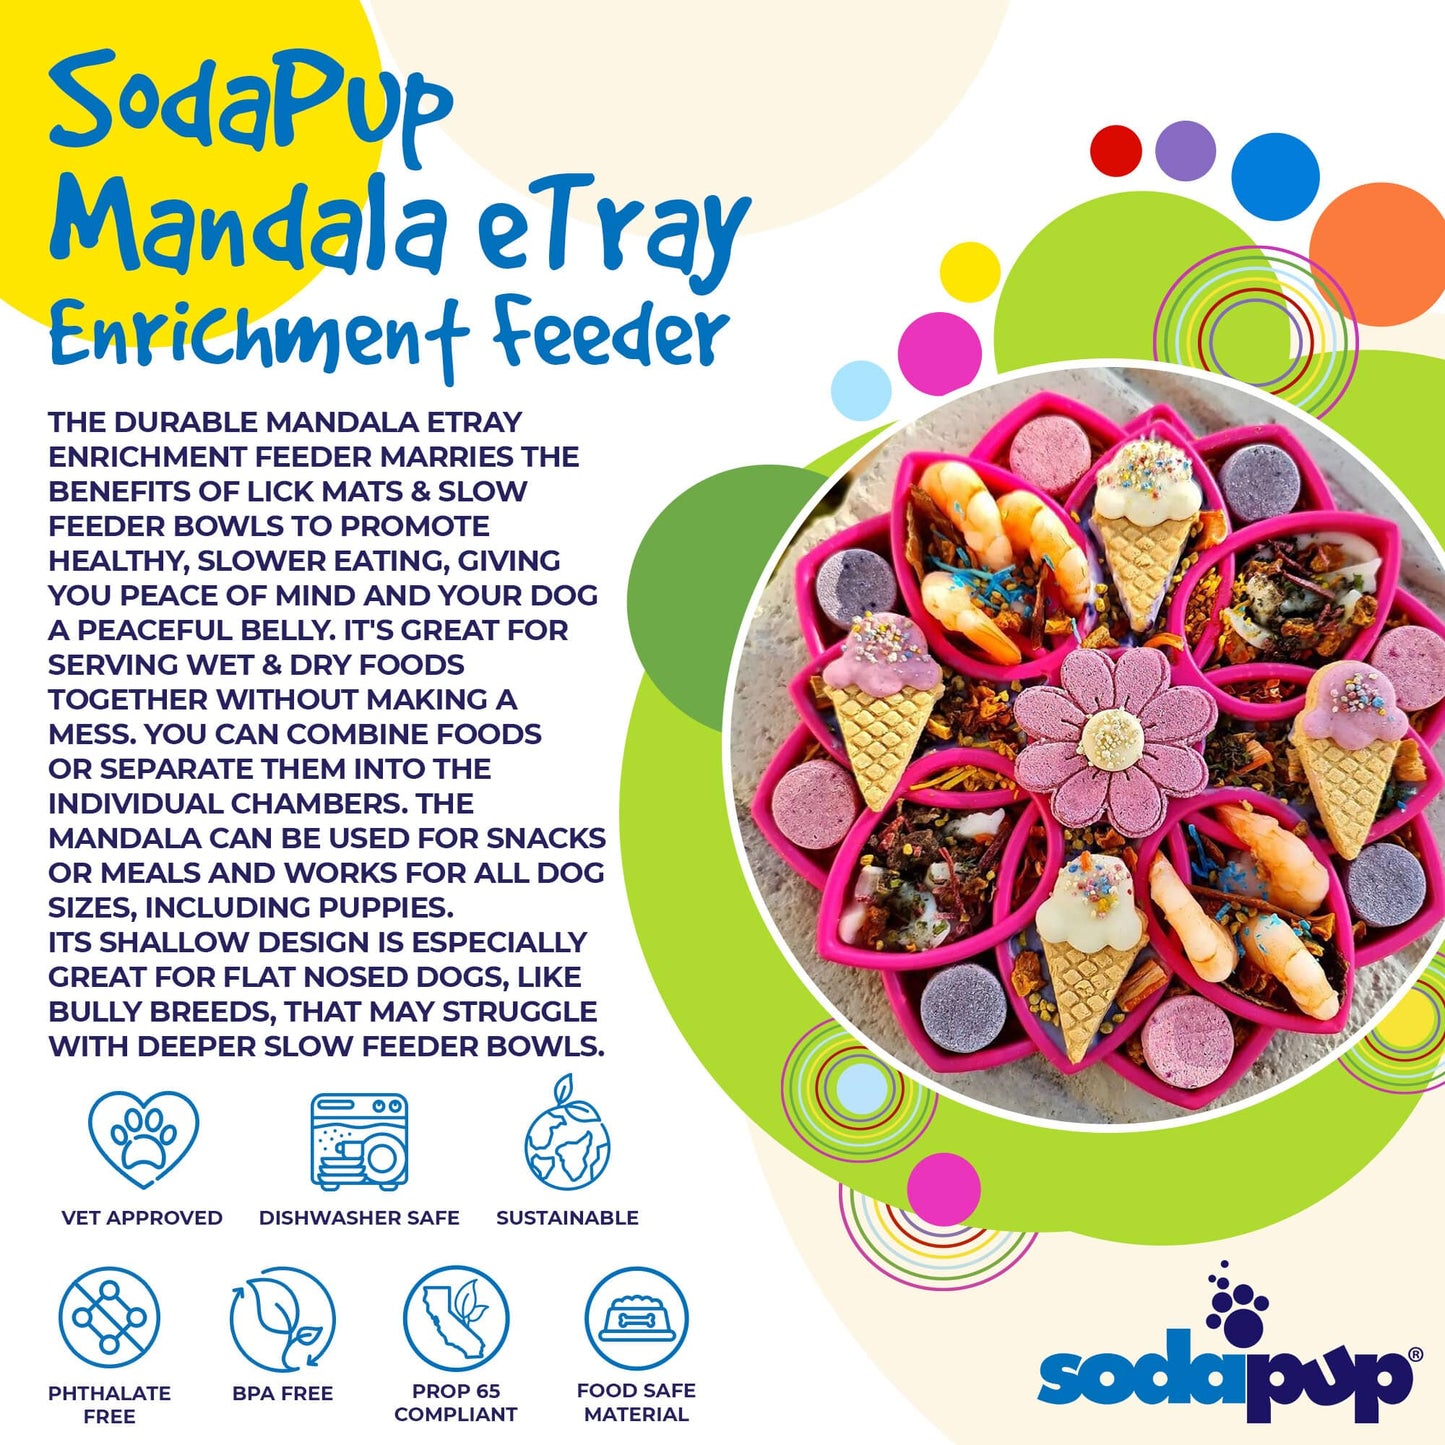 SodaPup Mandala eTray Enrichment Tray for Dogs